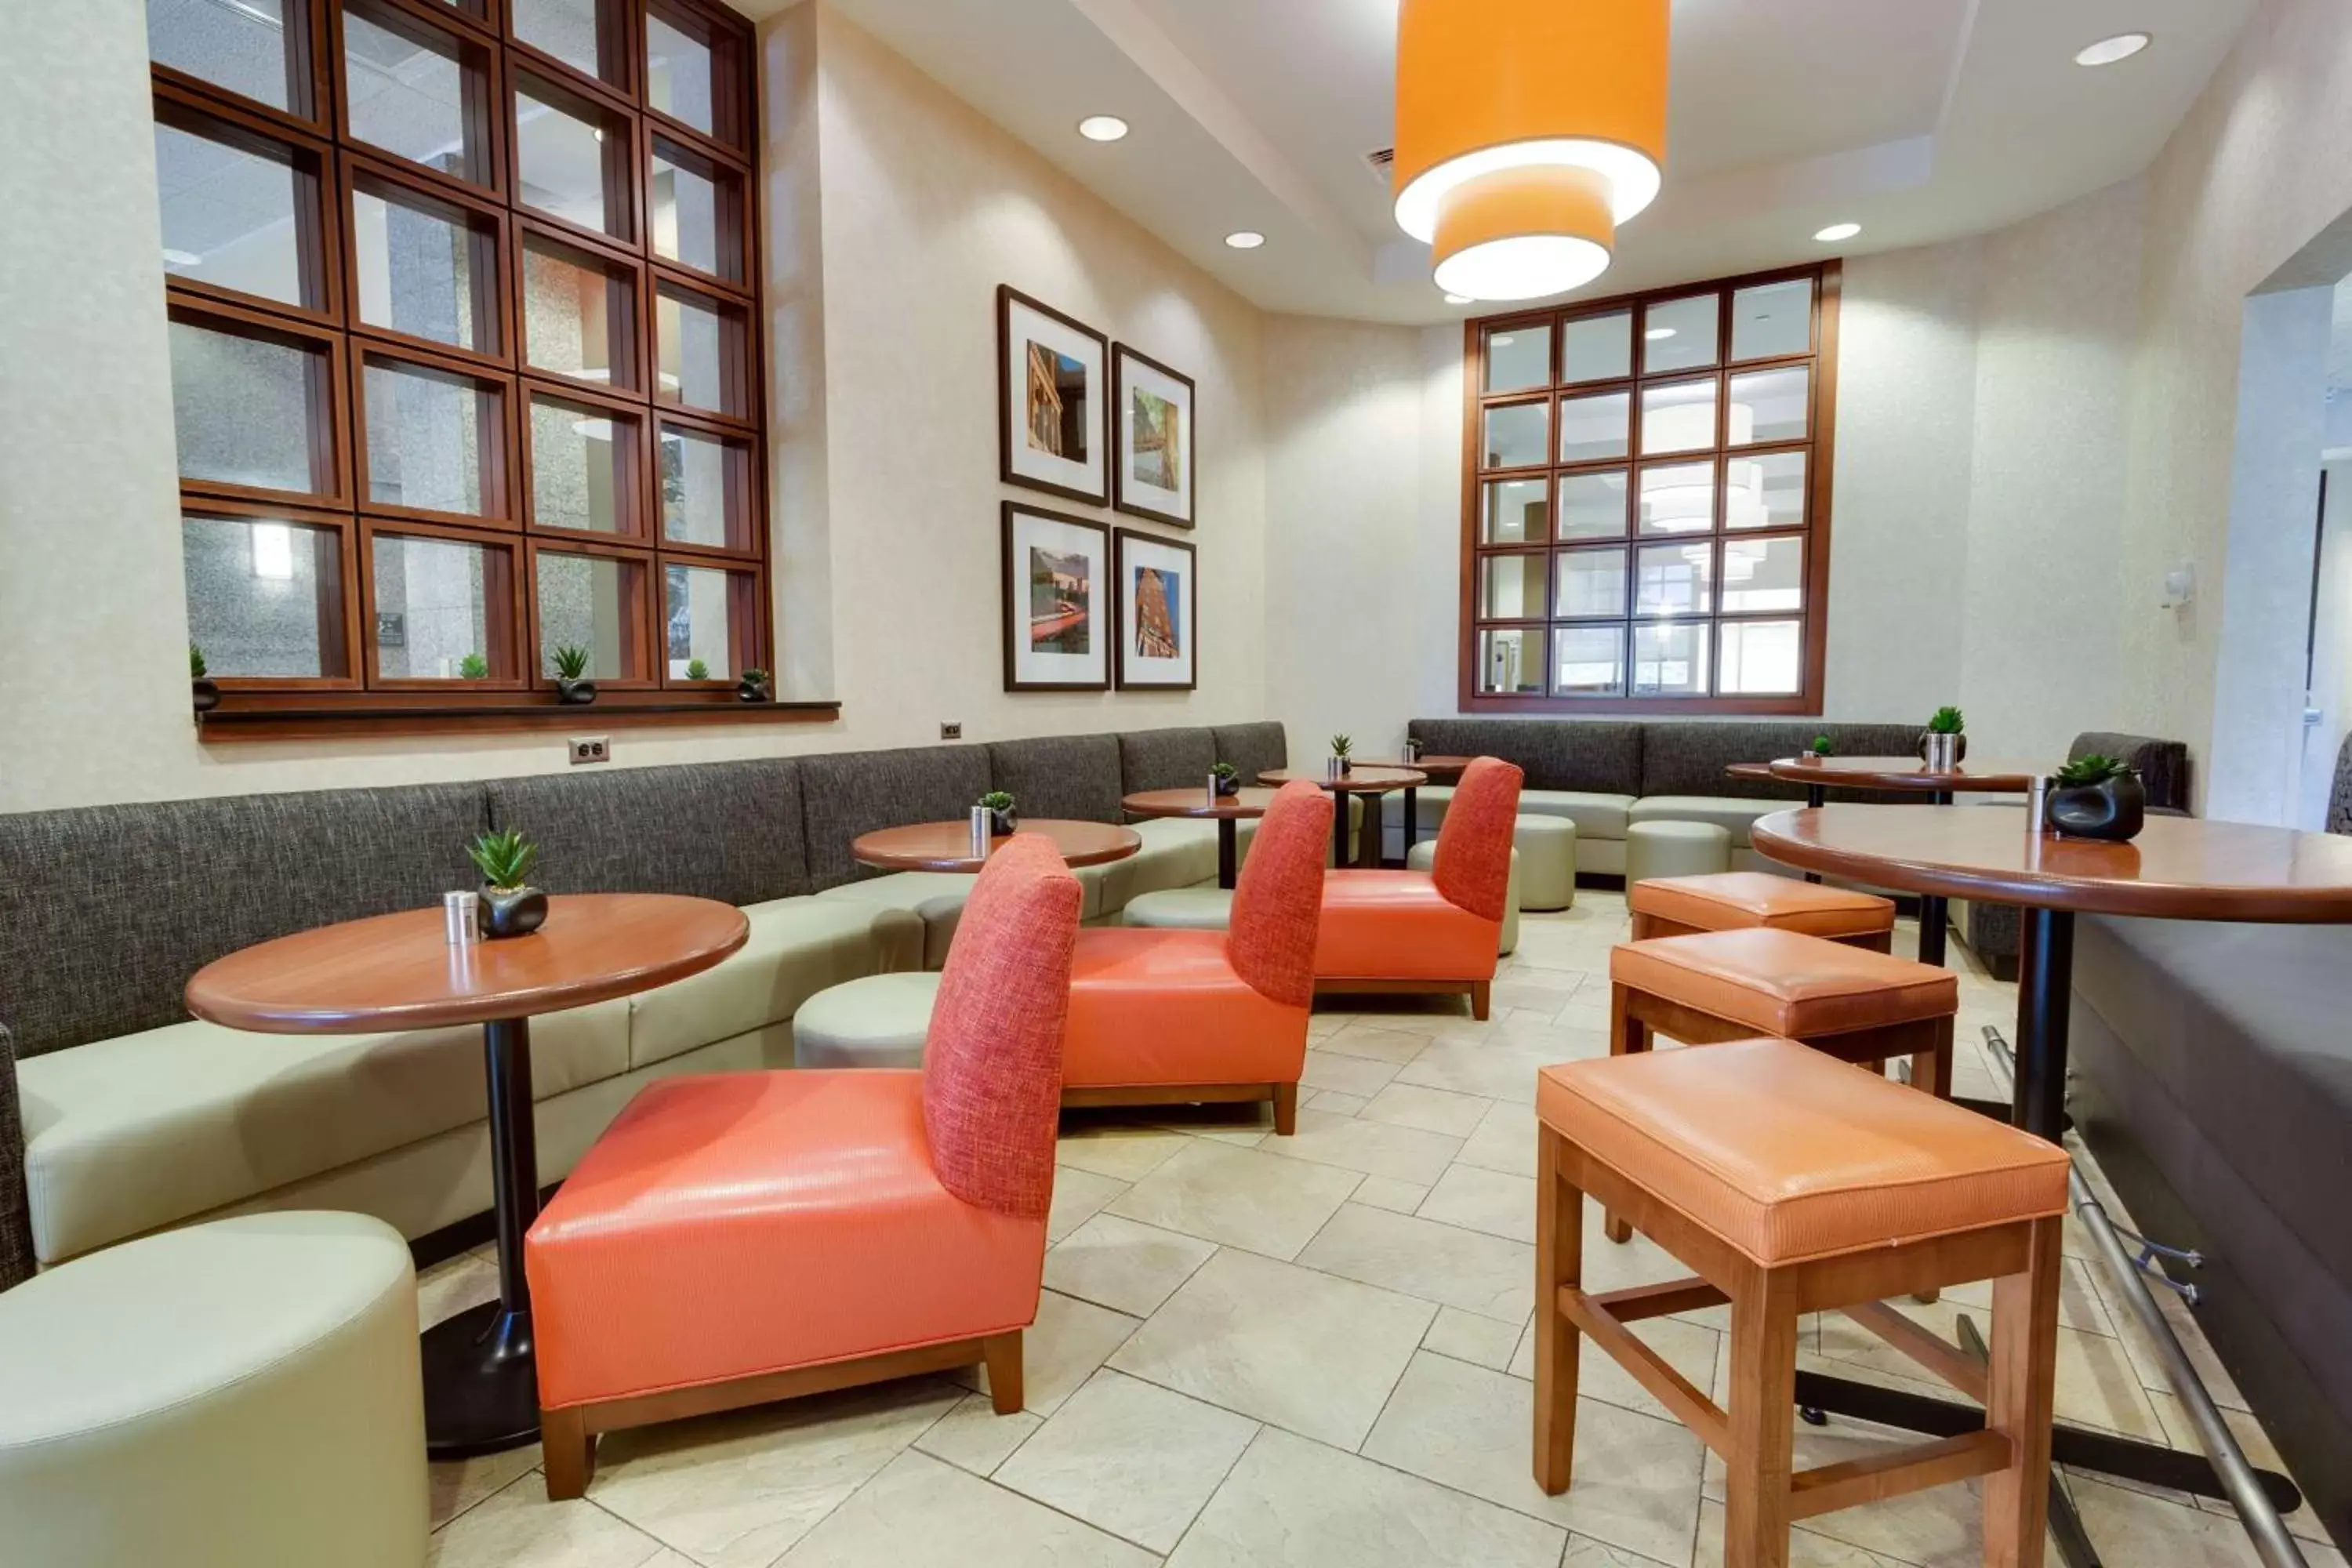 Restaurant/places to eat in Drury Inn & Suites Greenville